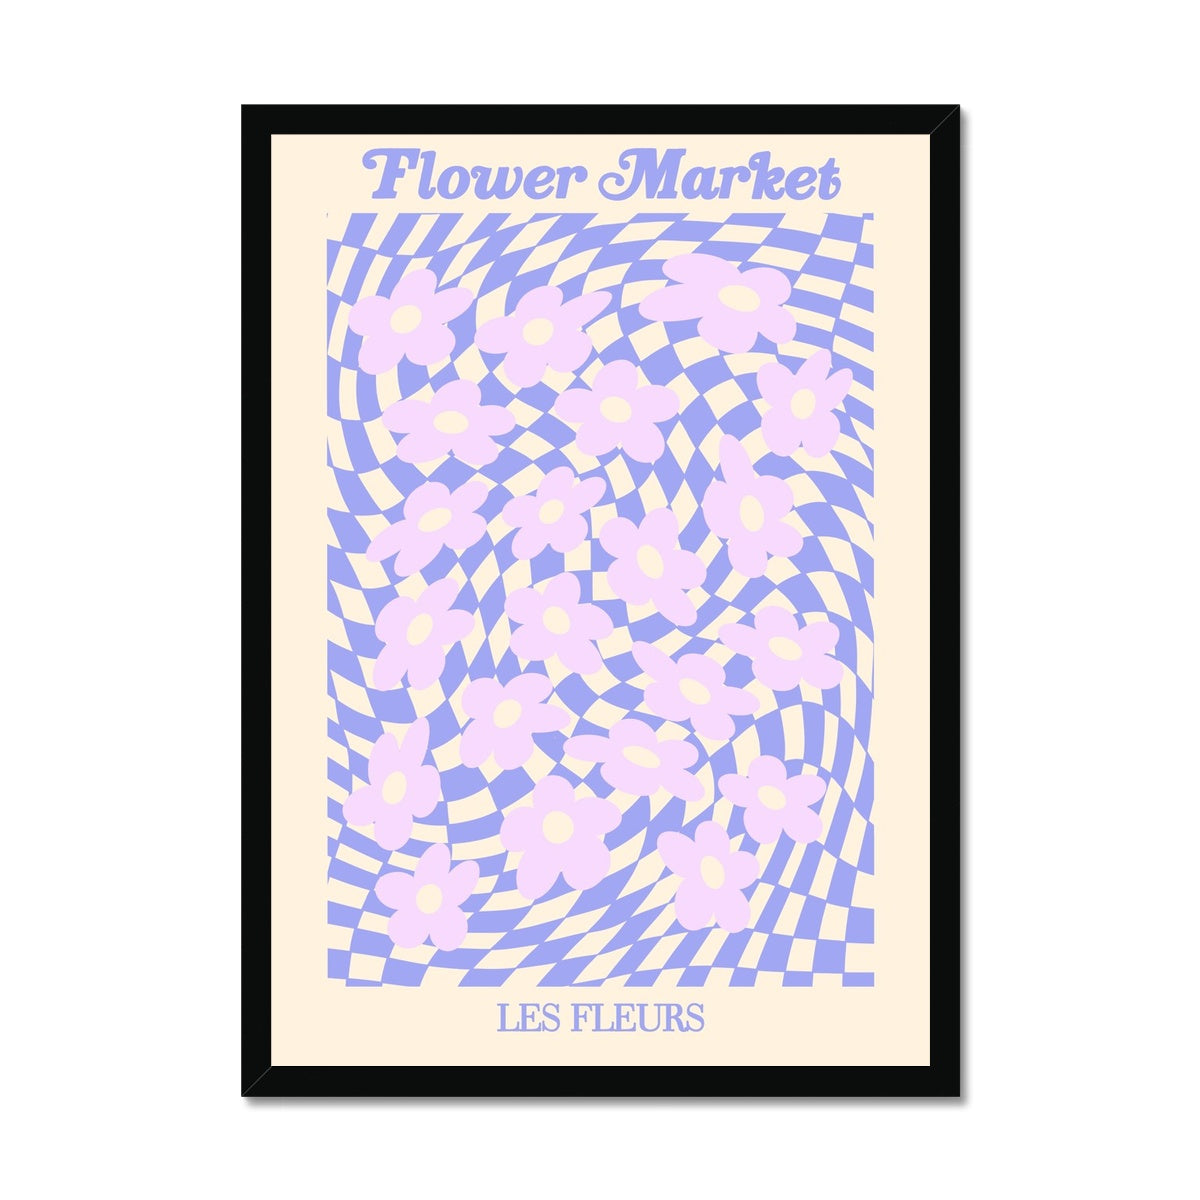 © les muses / Our Flower Market / Psychedelic collection features wall art with checkered floral daisy illustrations under original hand drawn typography, titled Flower Market / Les Fleurs. Danish pastel posters full of checkers and daisies to brighten up any gallery wall.
